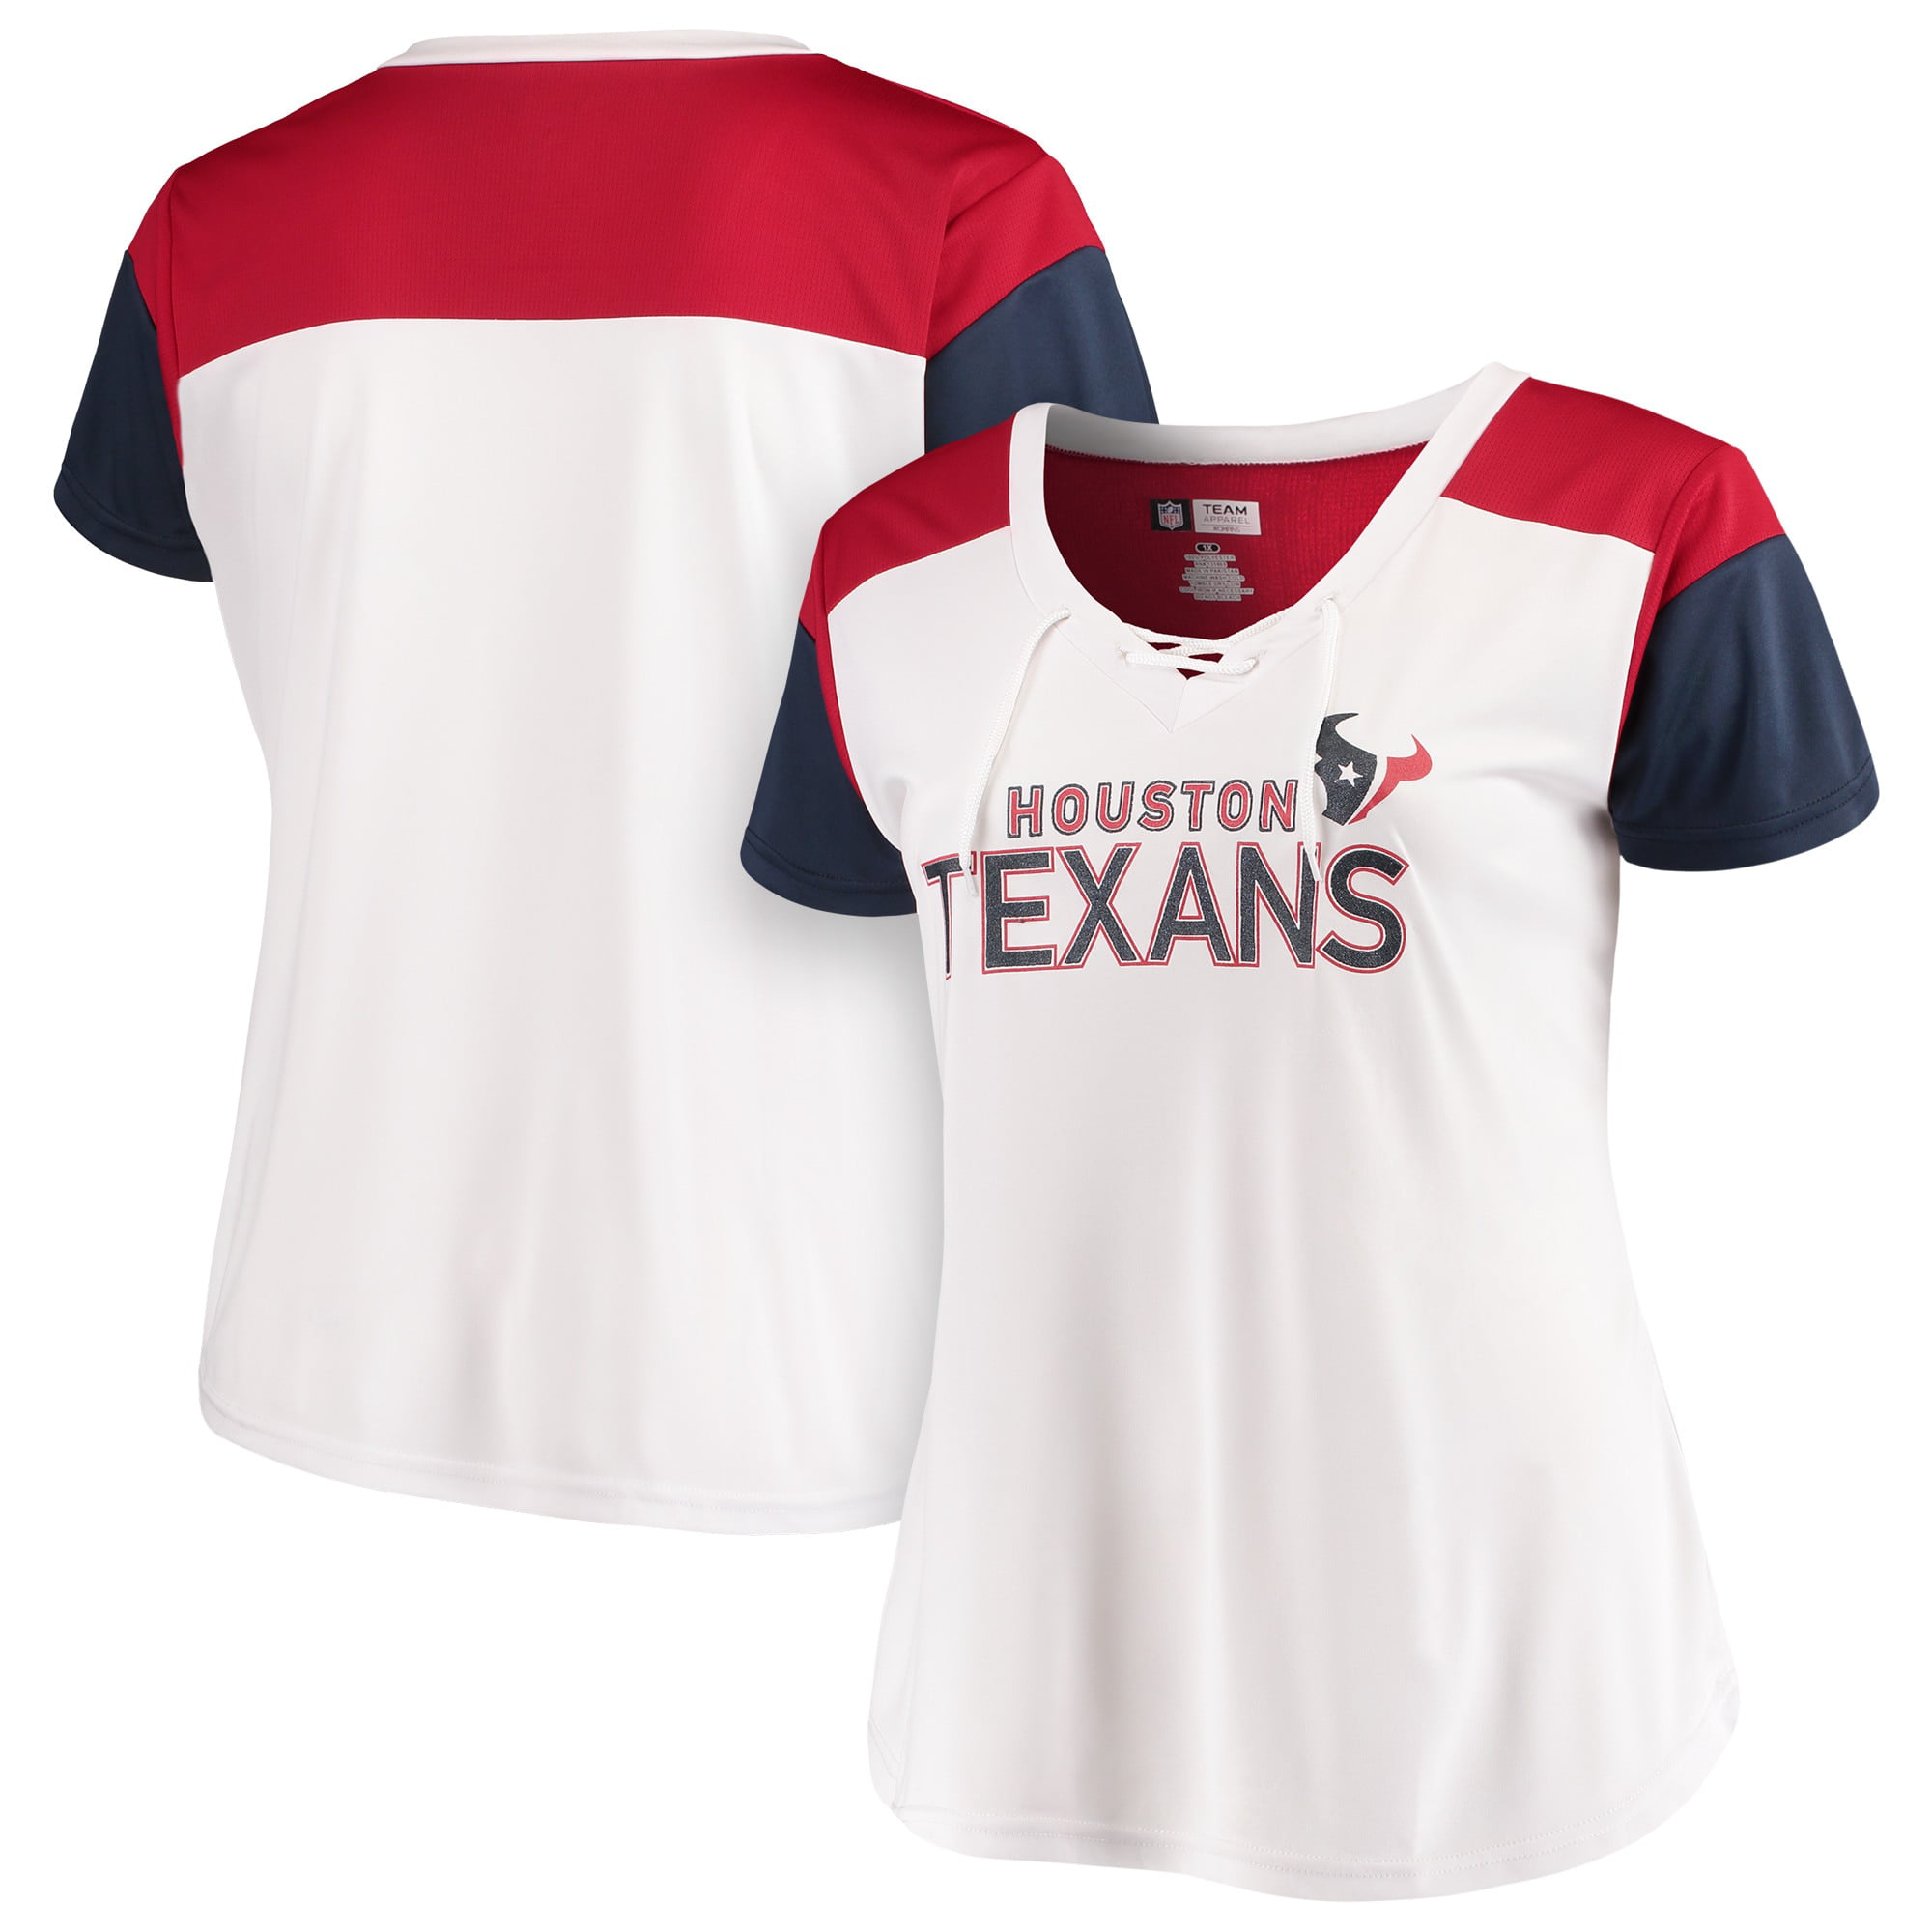 womens texans jersey with rhinestones